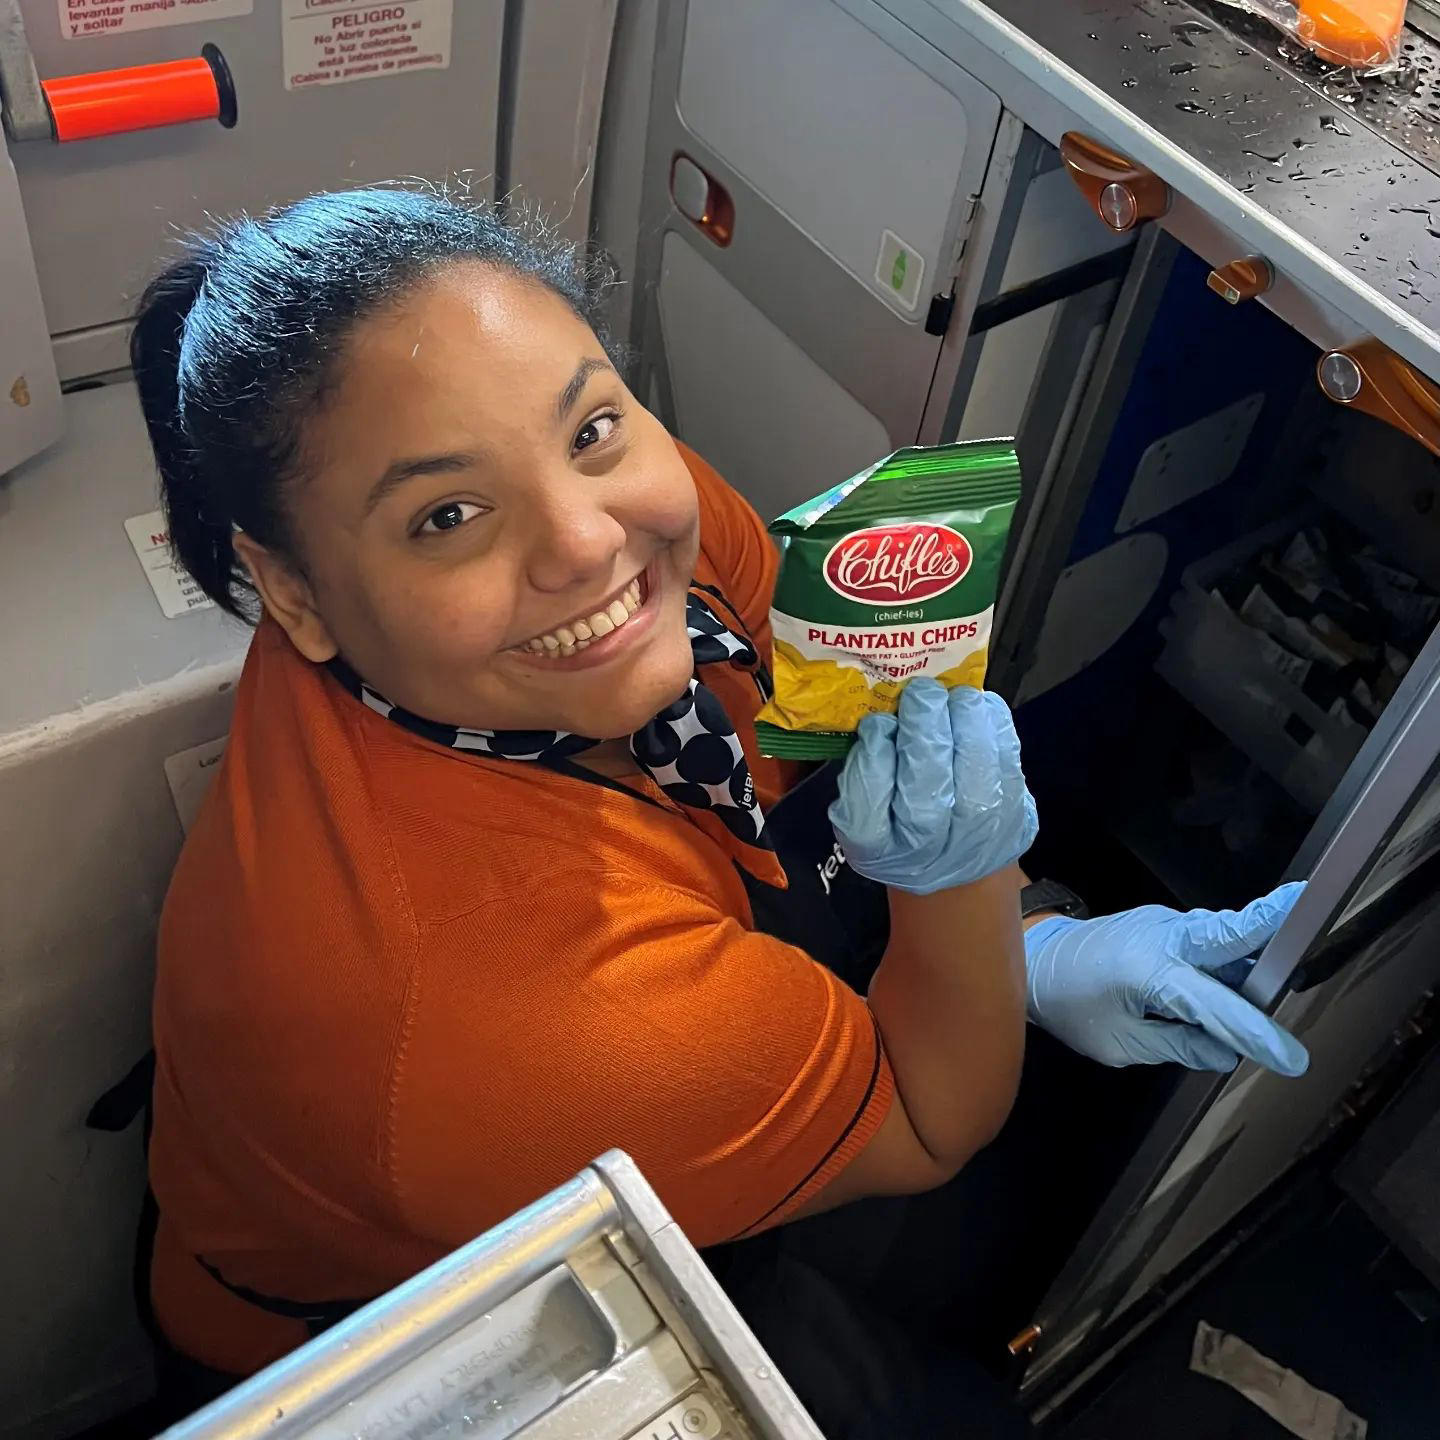 JetBlue - These chips are plantains